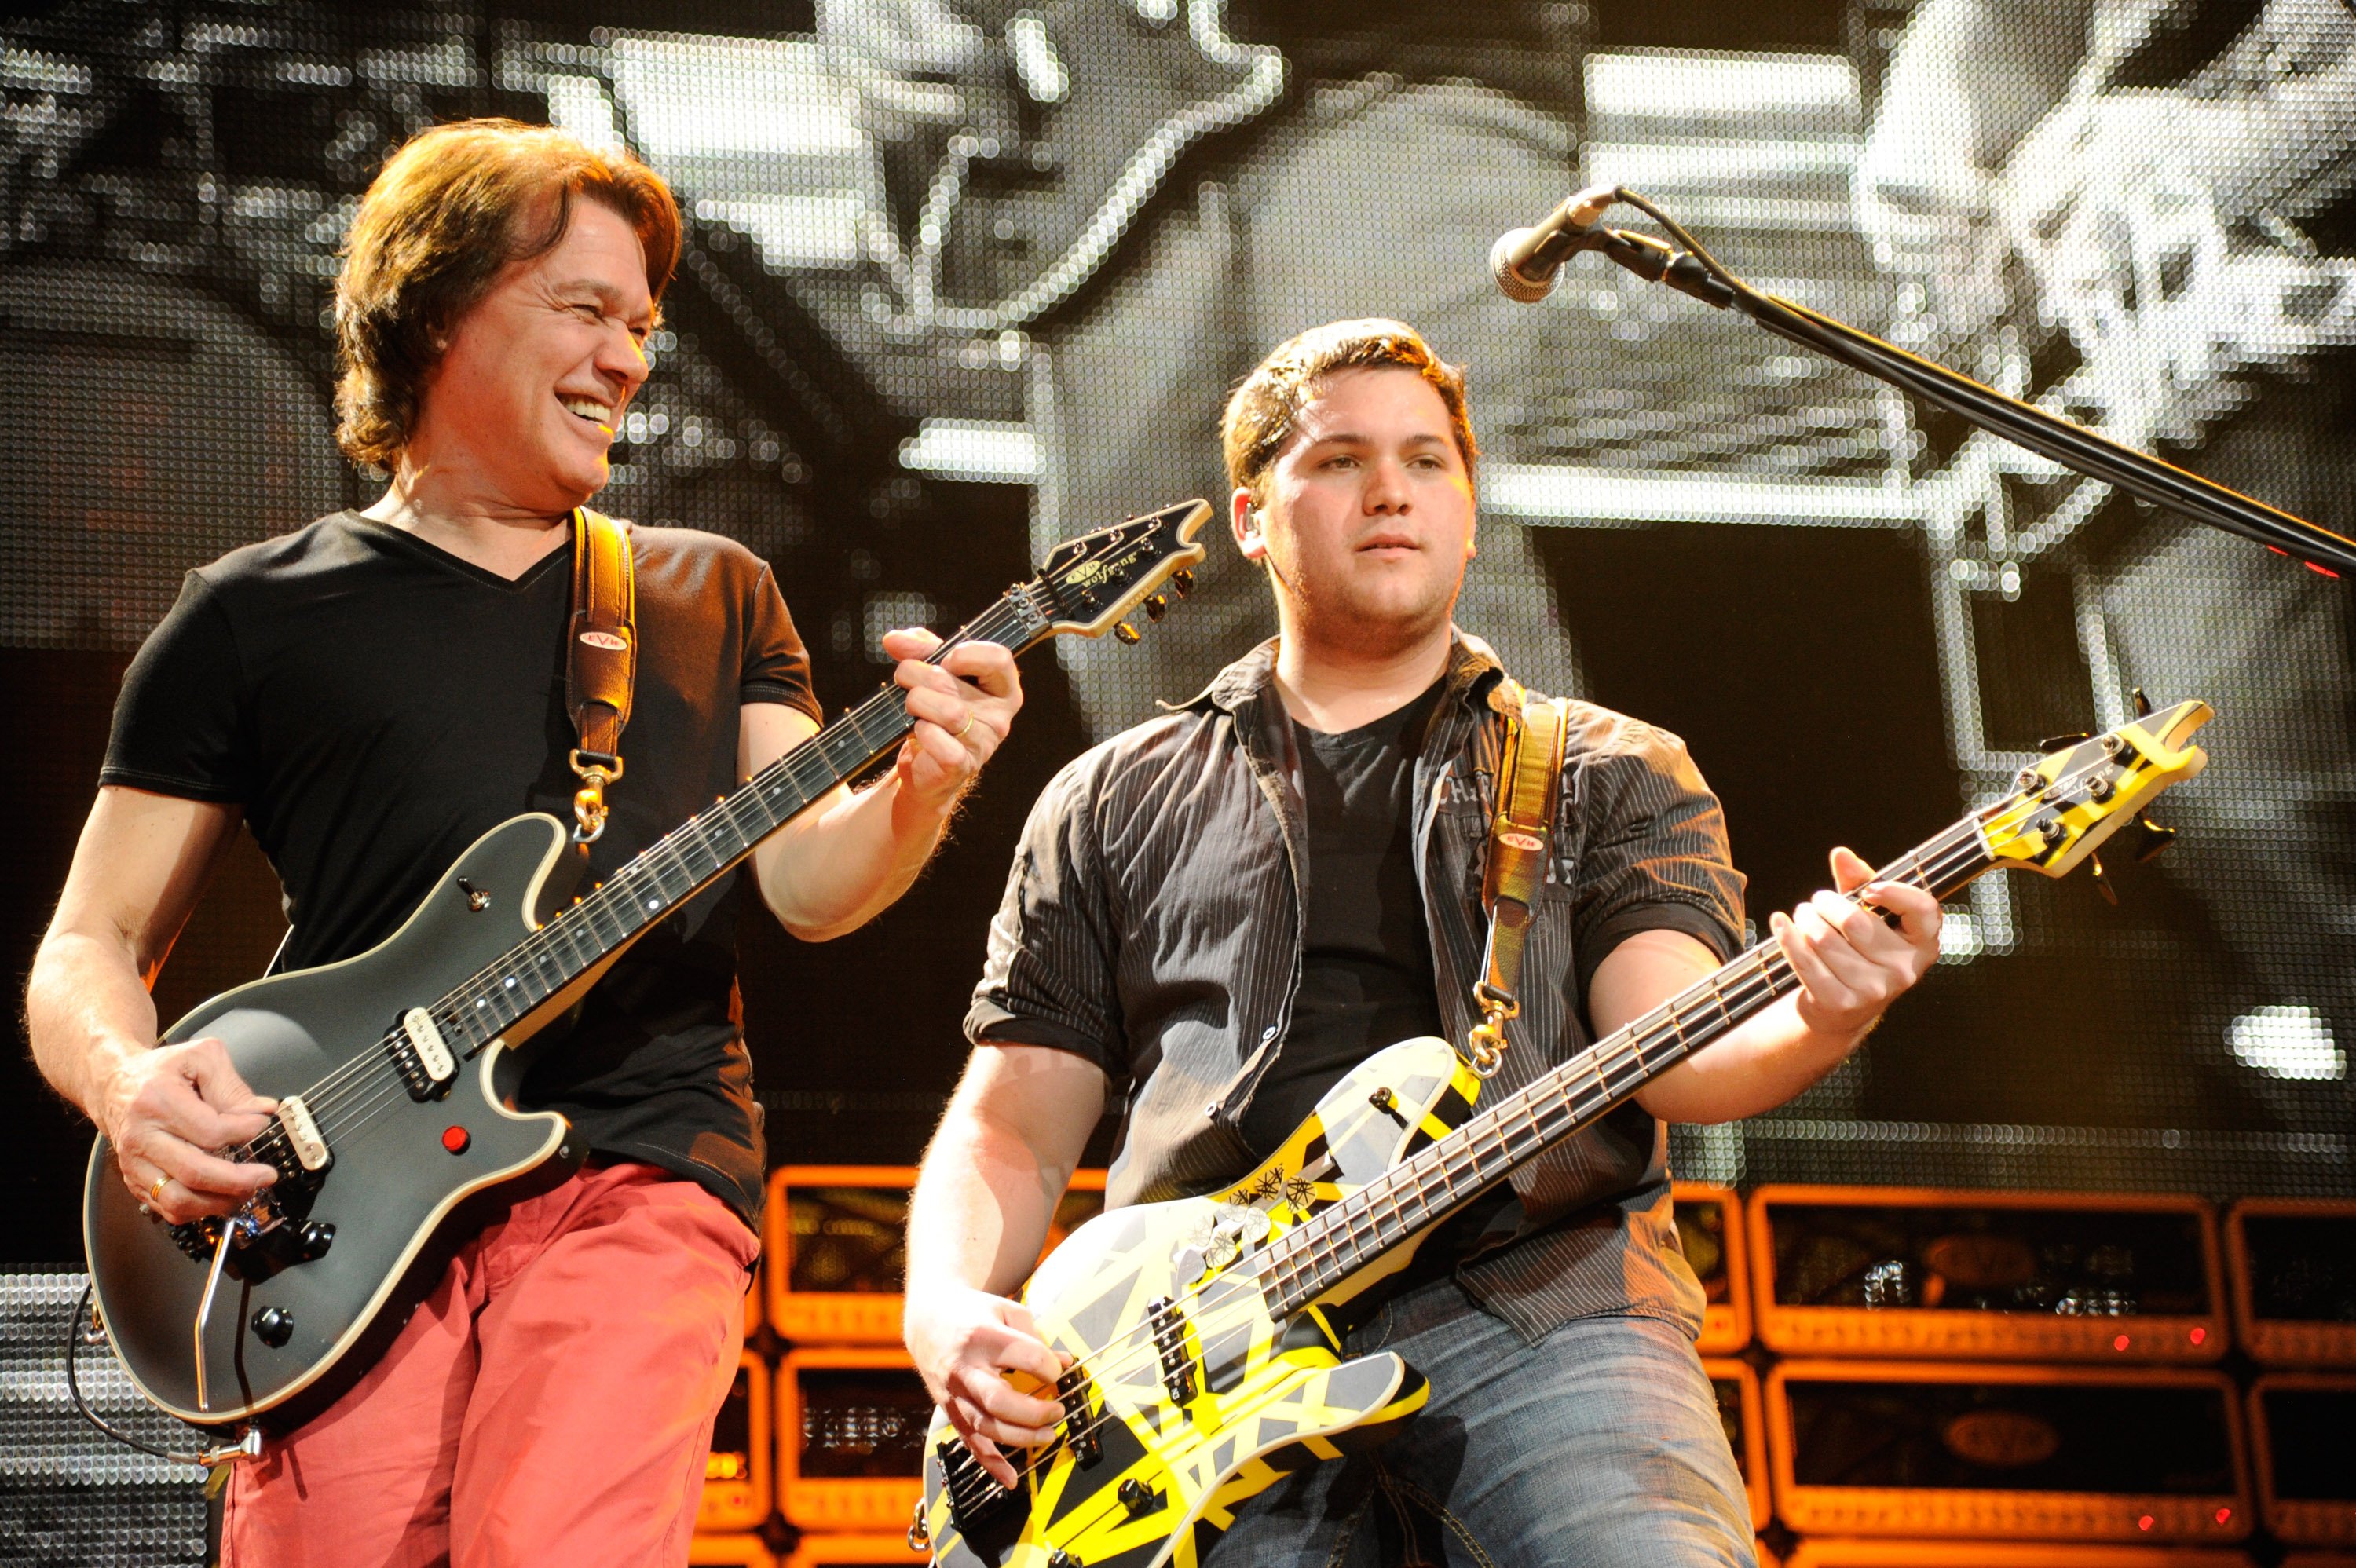 Eddie Van Halen and Wolfgang Van Halen perform during "A Different Kind of Truth" tour at Madison Square Garden on February 28, 2012 in New York City | Photo: Getty Images